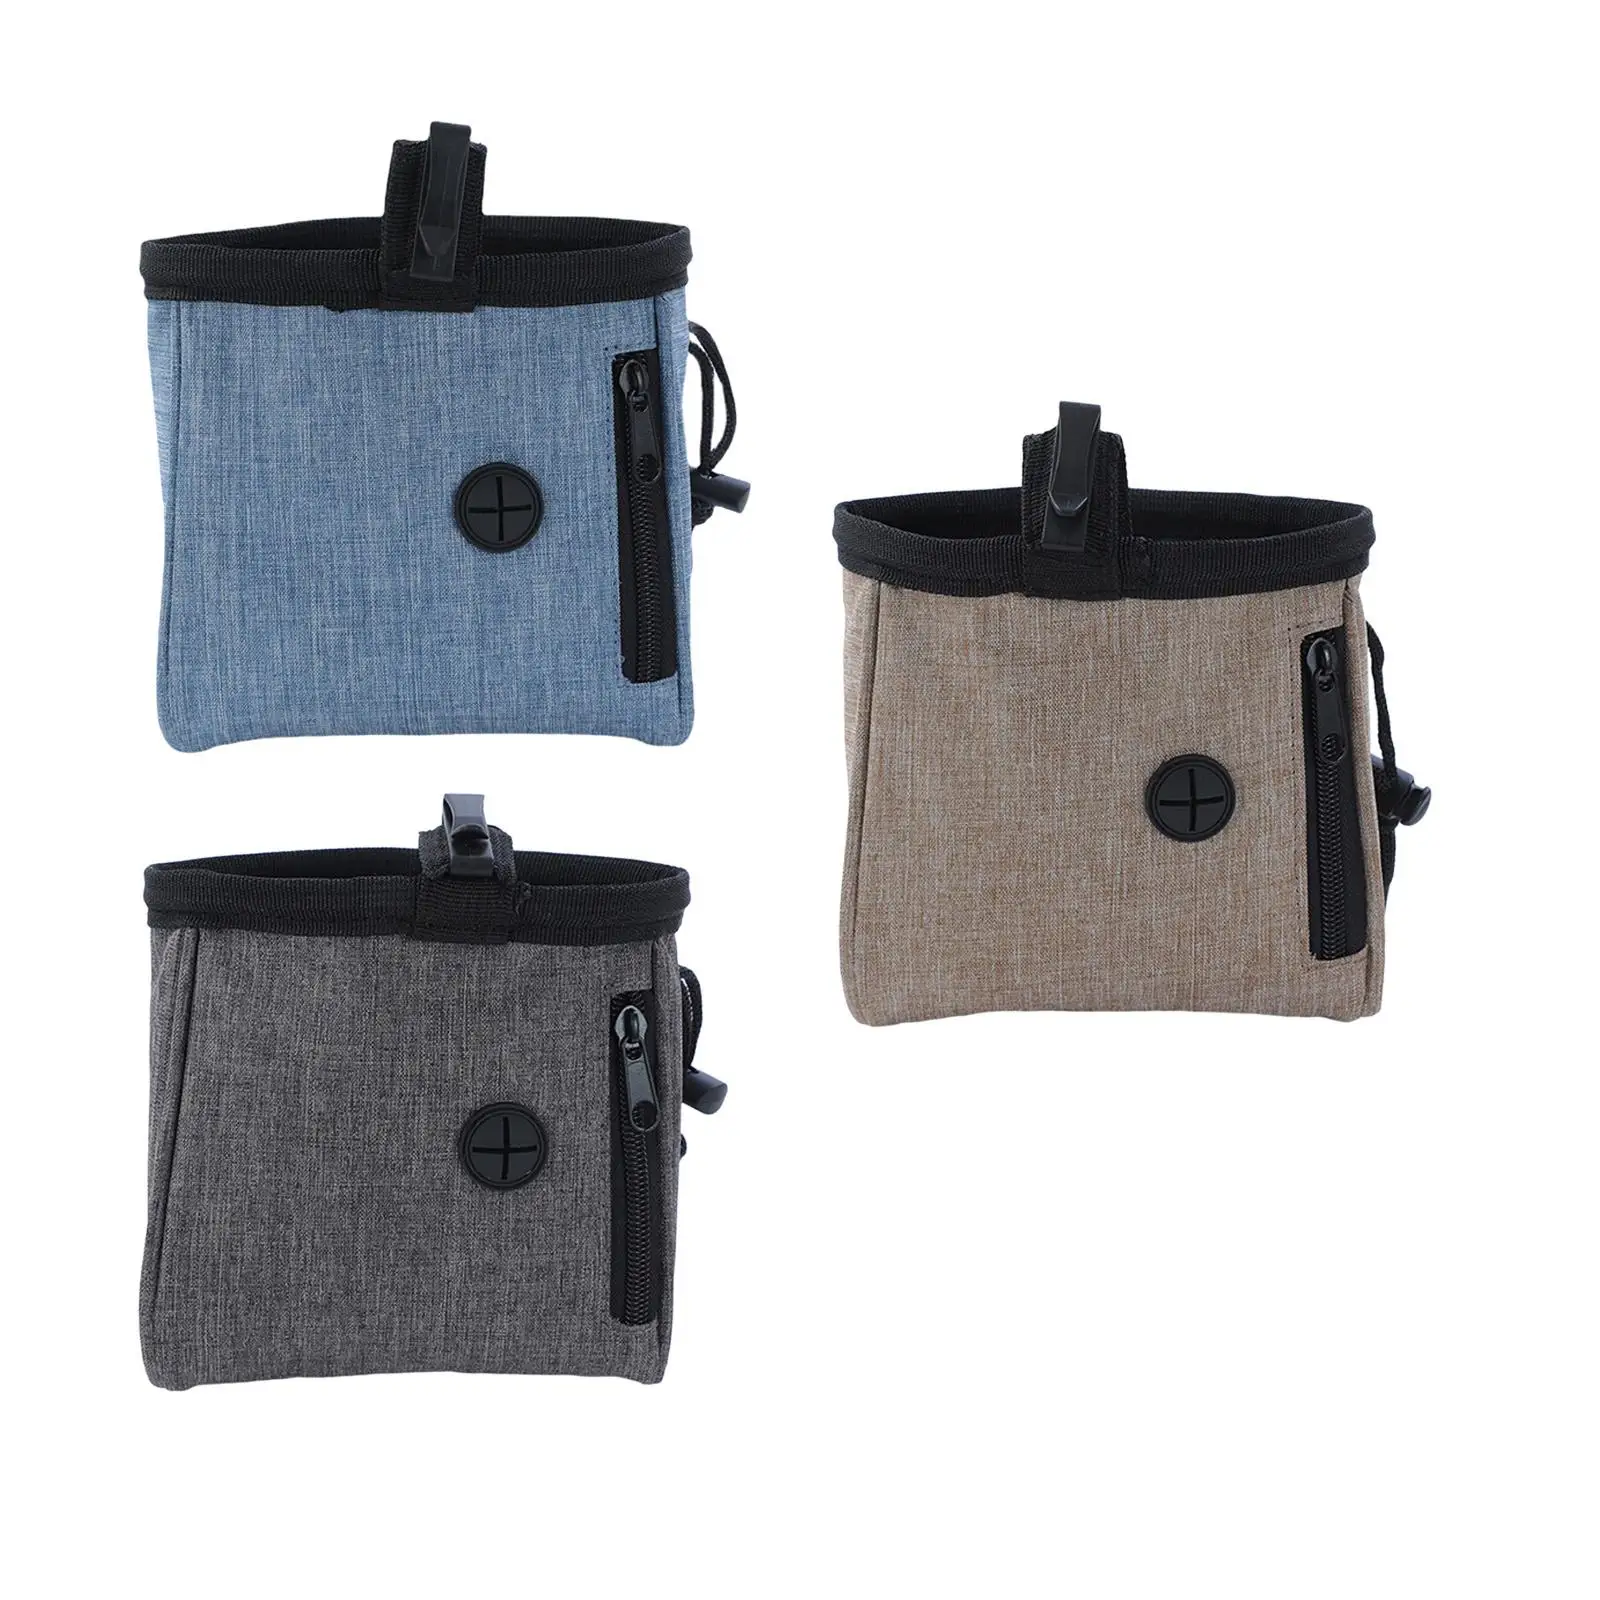 Pet Dogs Treat Pouch Multipurpose with Clip Waist Belt Snack Storage Carrier Holder for Jogging Daily Travel Outdoor Hiking